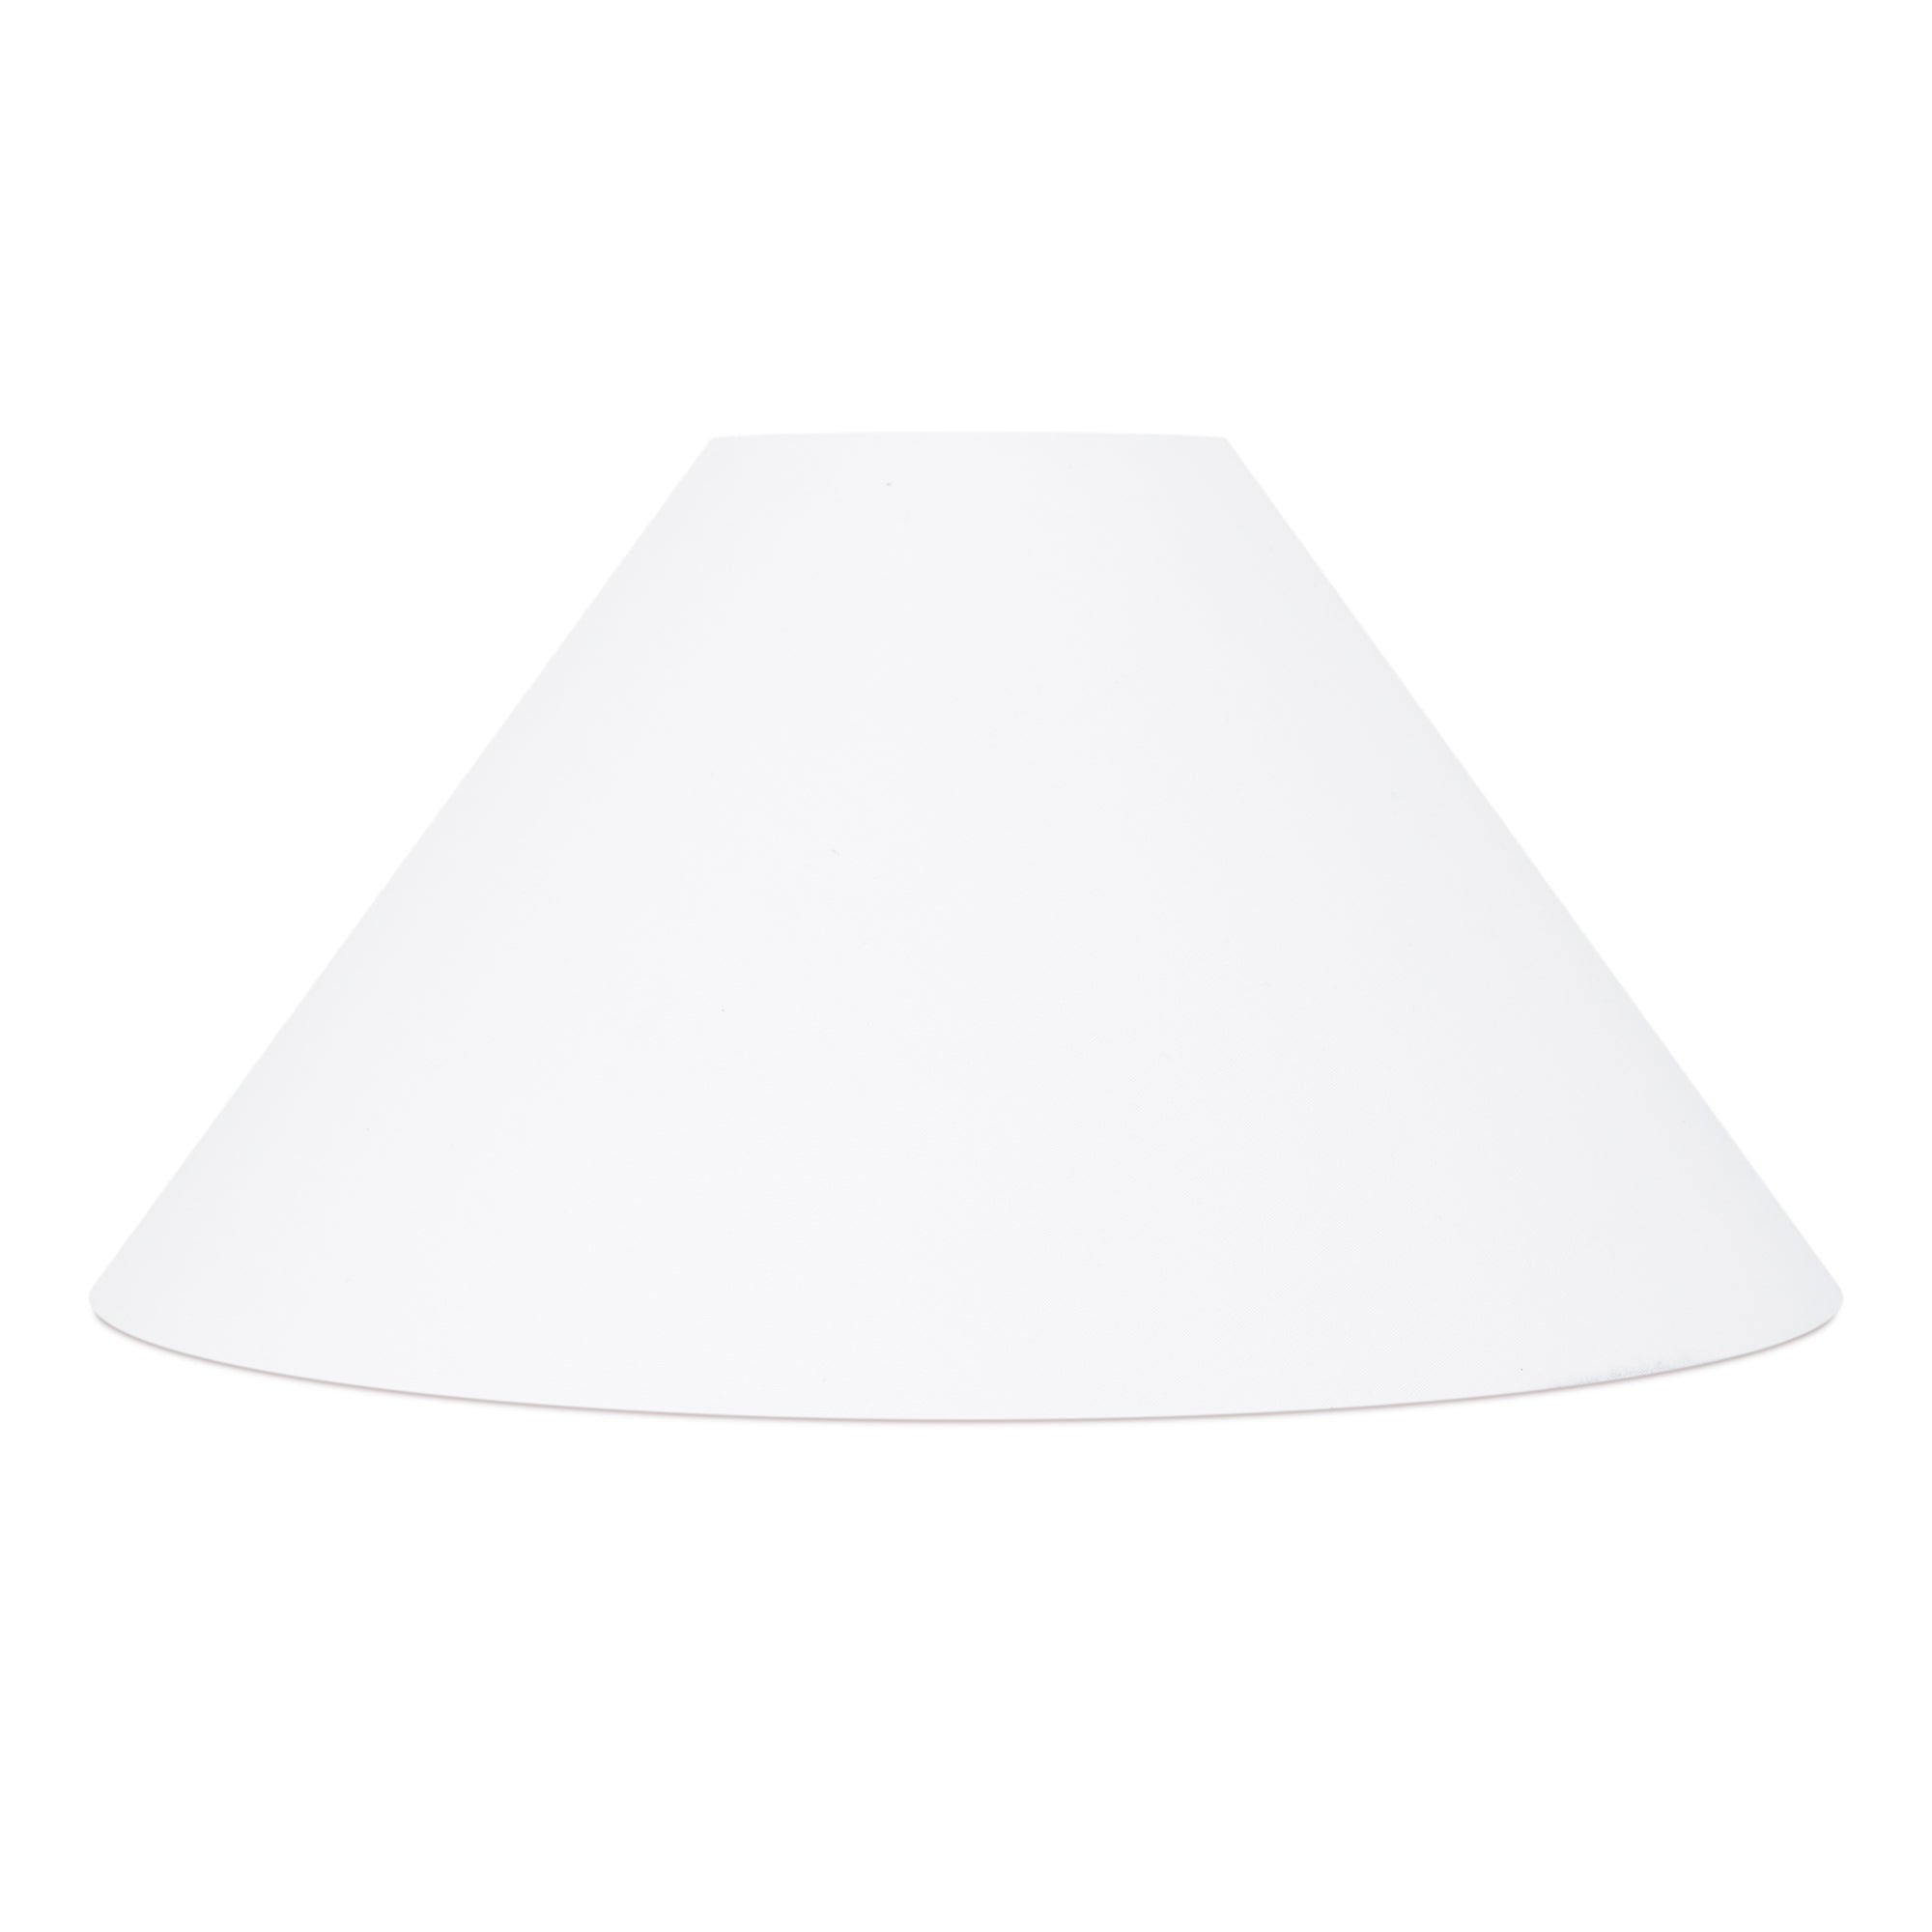 Coolie Shade - Pure White Slub Linen. White lining - Couture Lamps